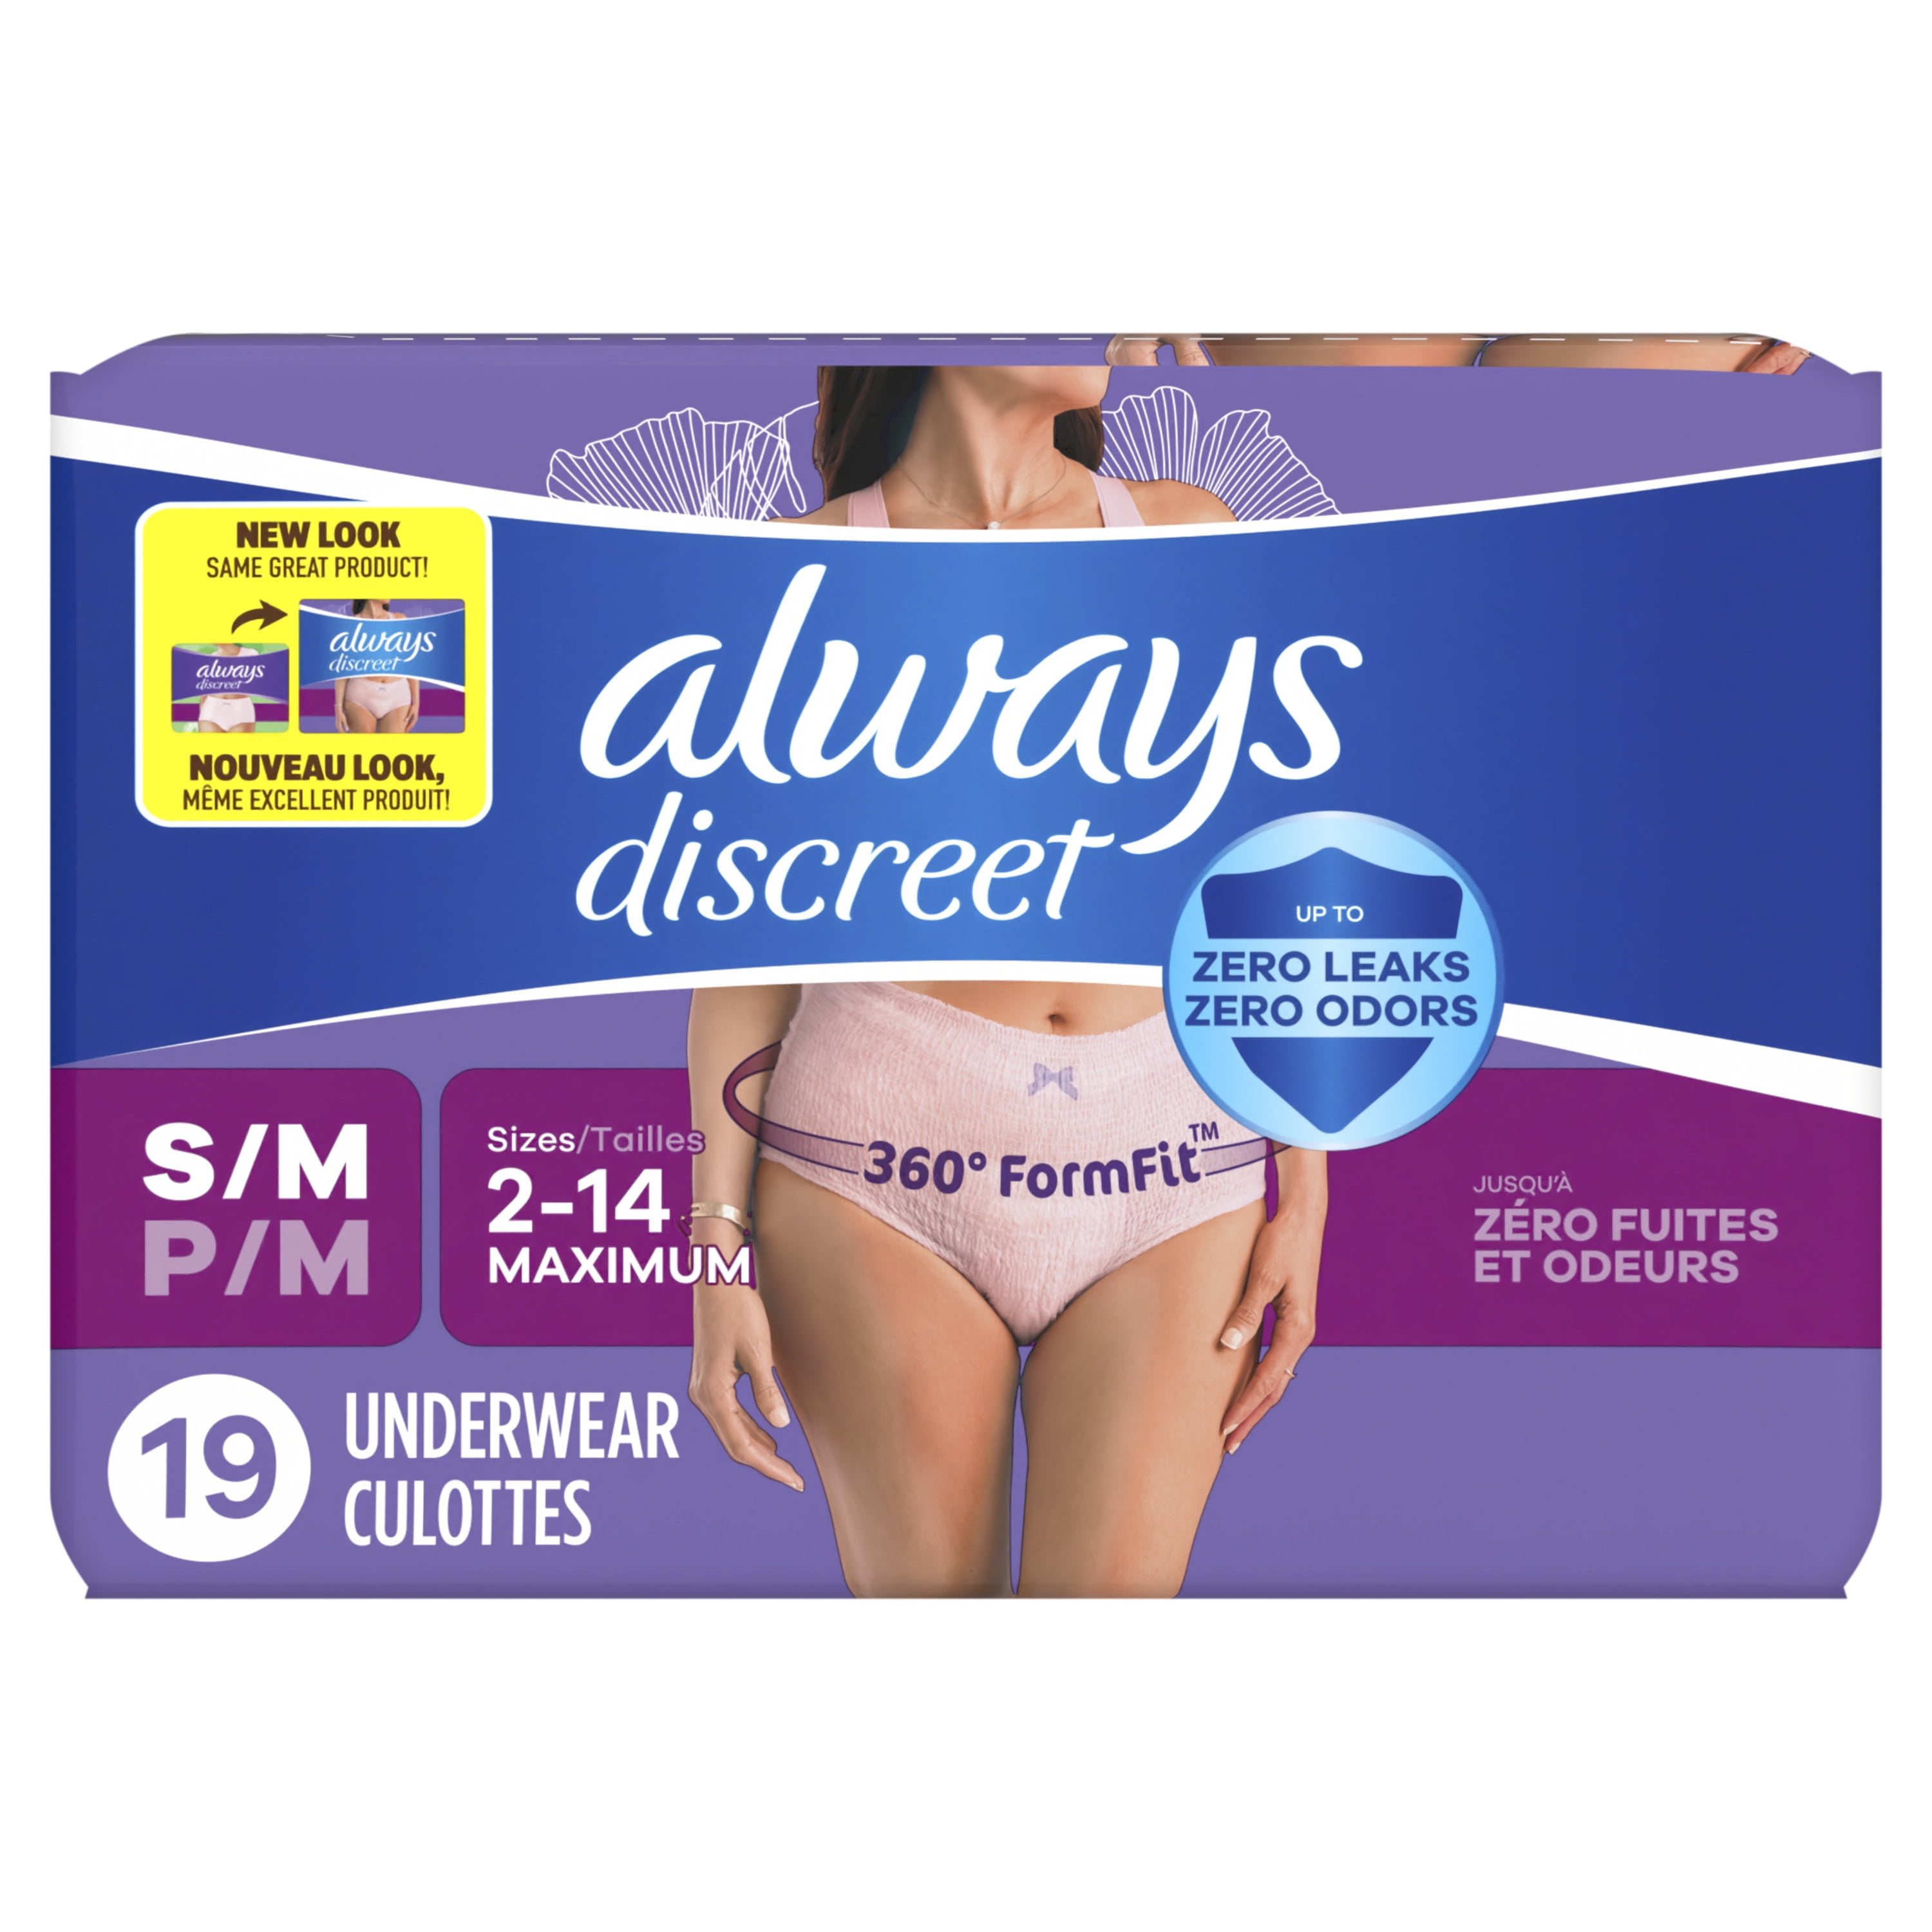 Always Discreet Adult Incontinence Underwear for Women, Size S/M, 32 CT 